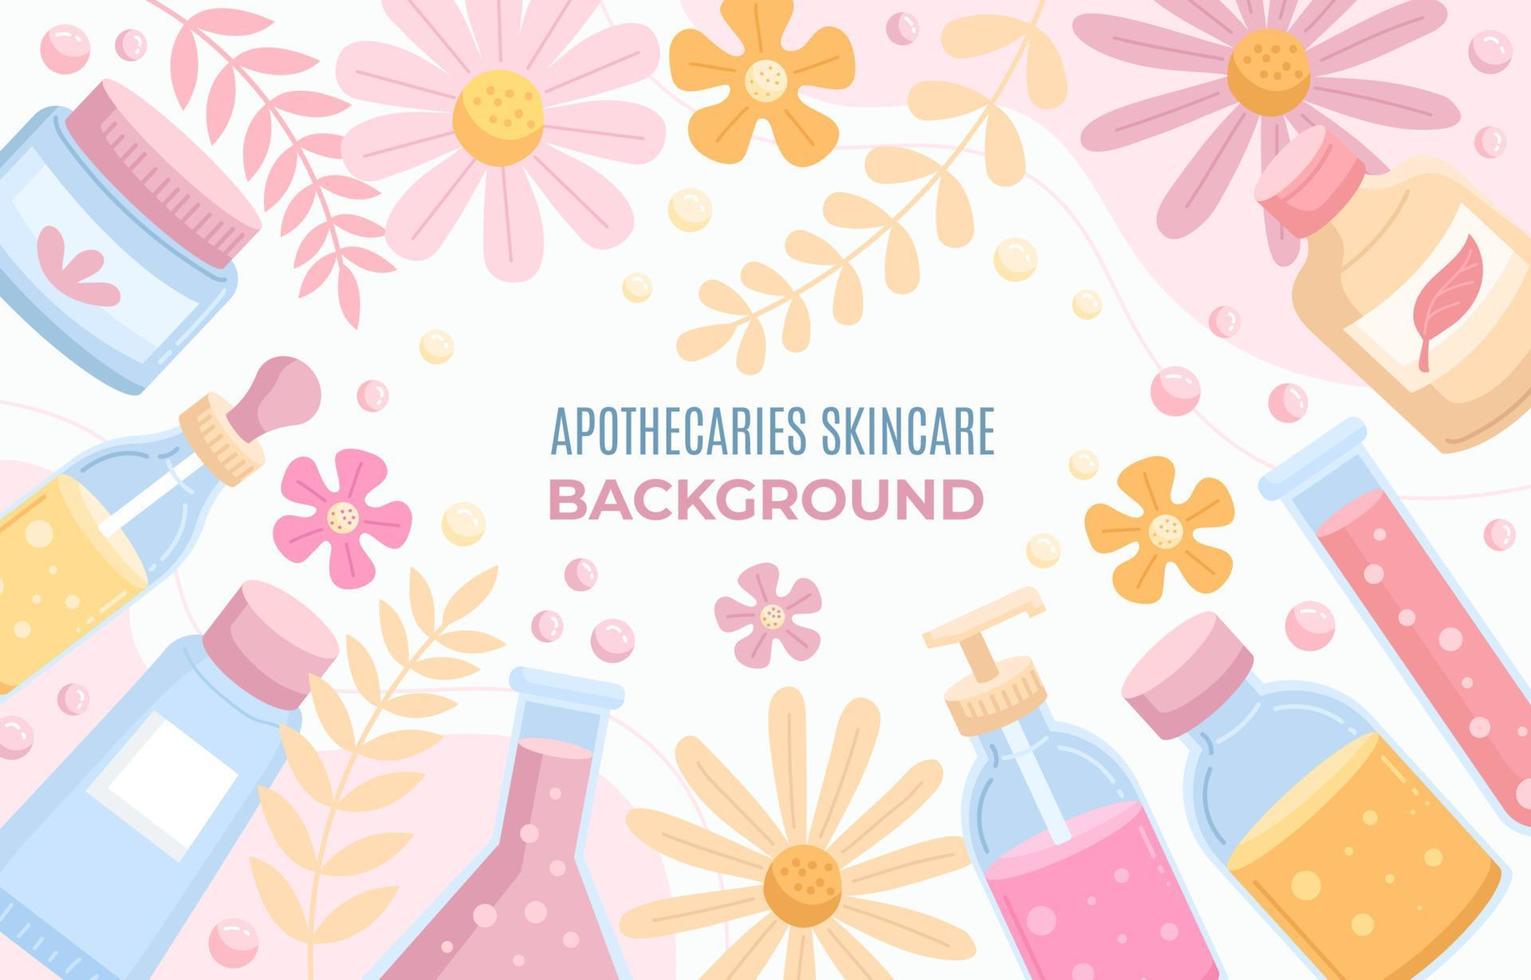 Modern Apothecaries Skincare Lab Background vector